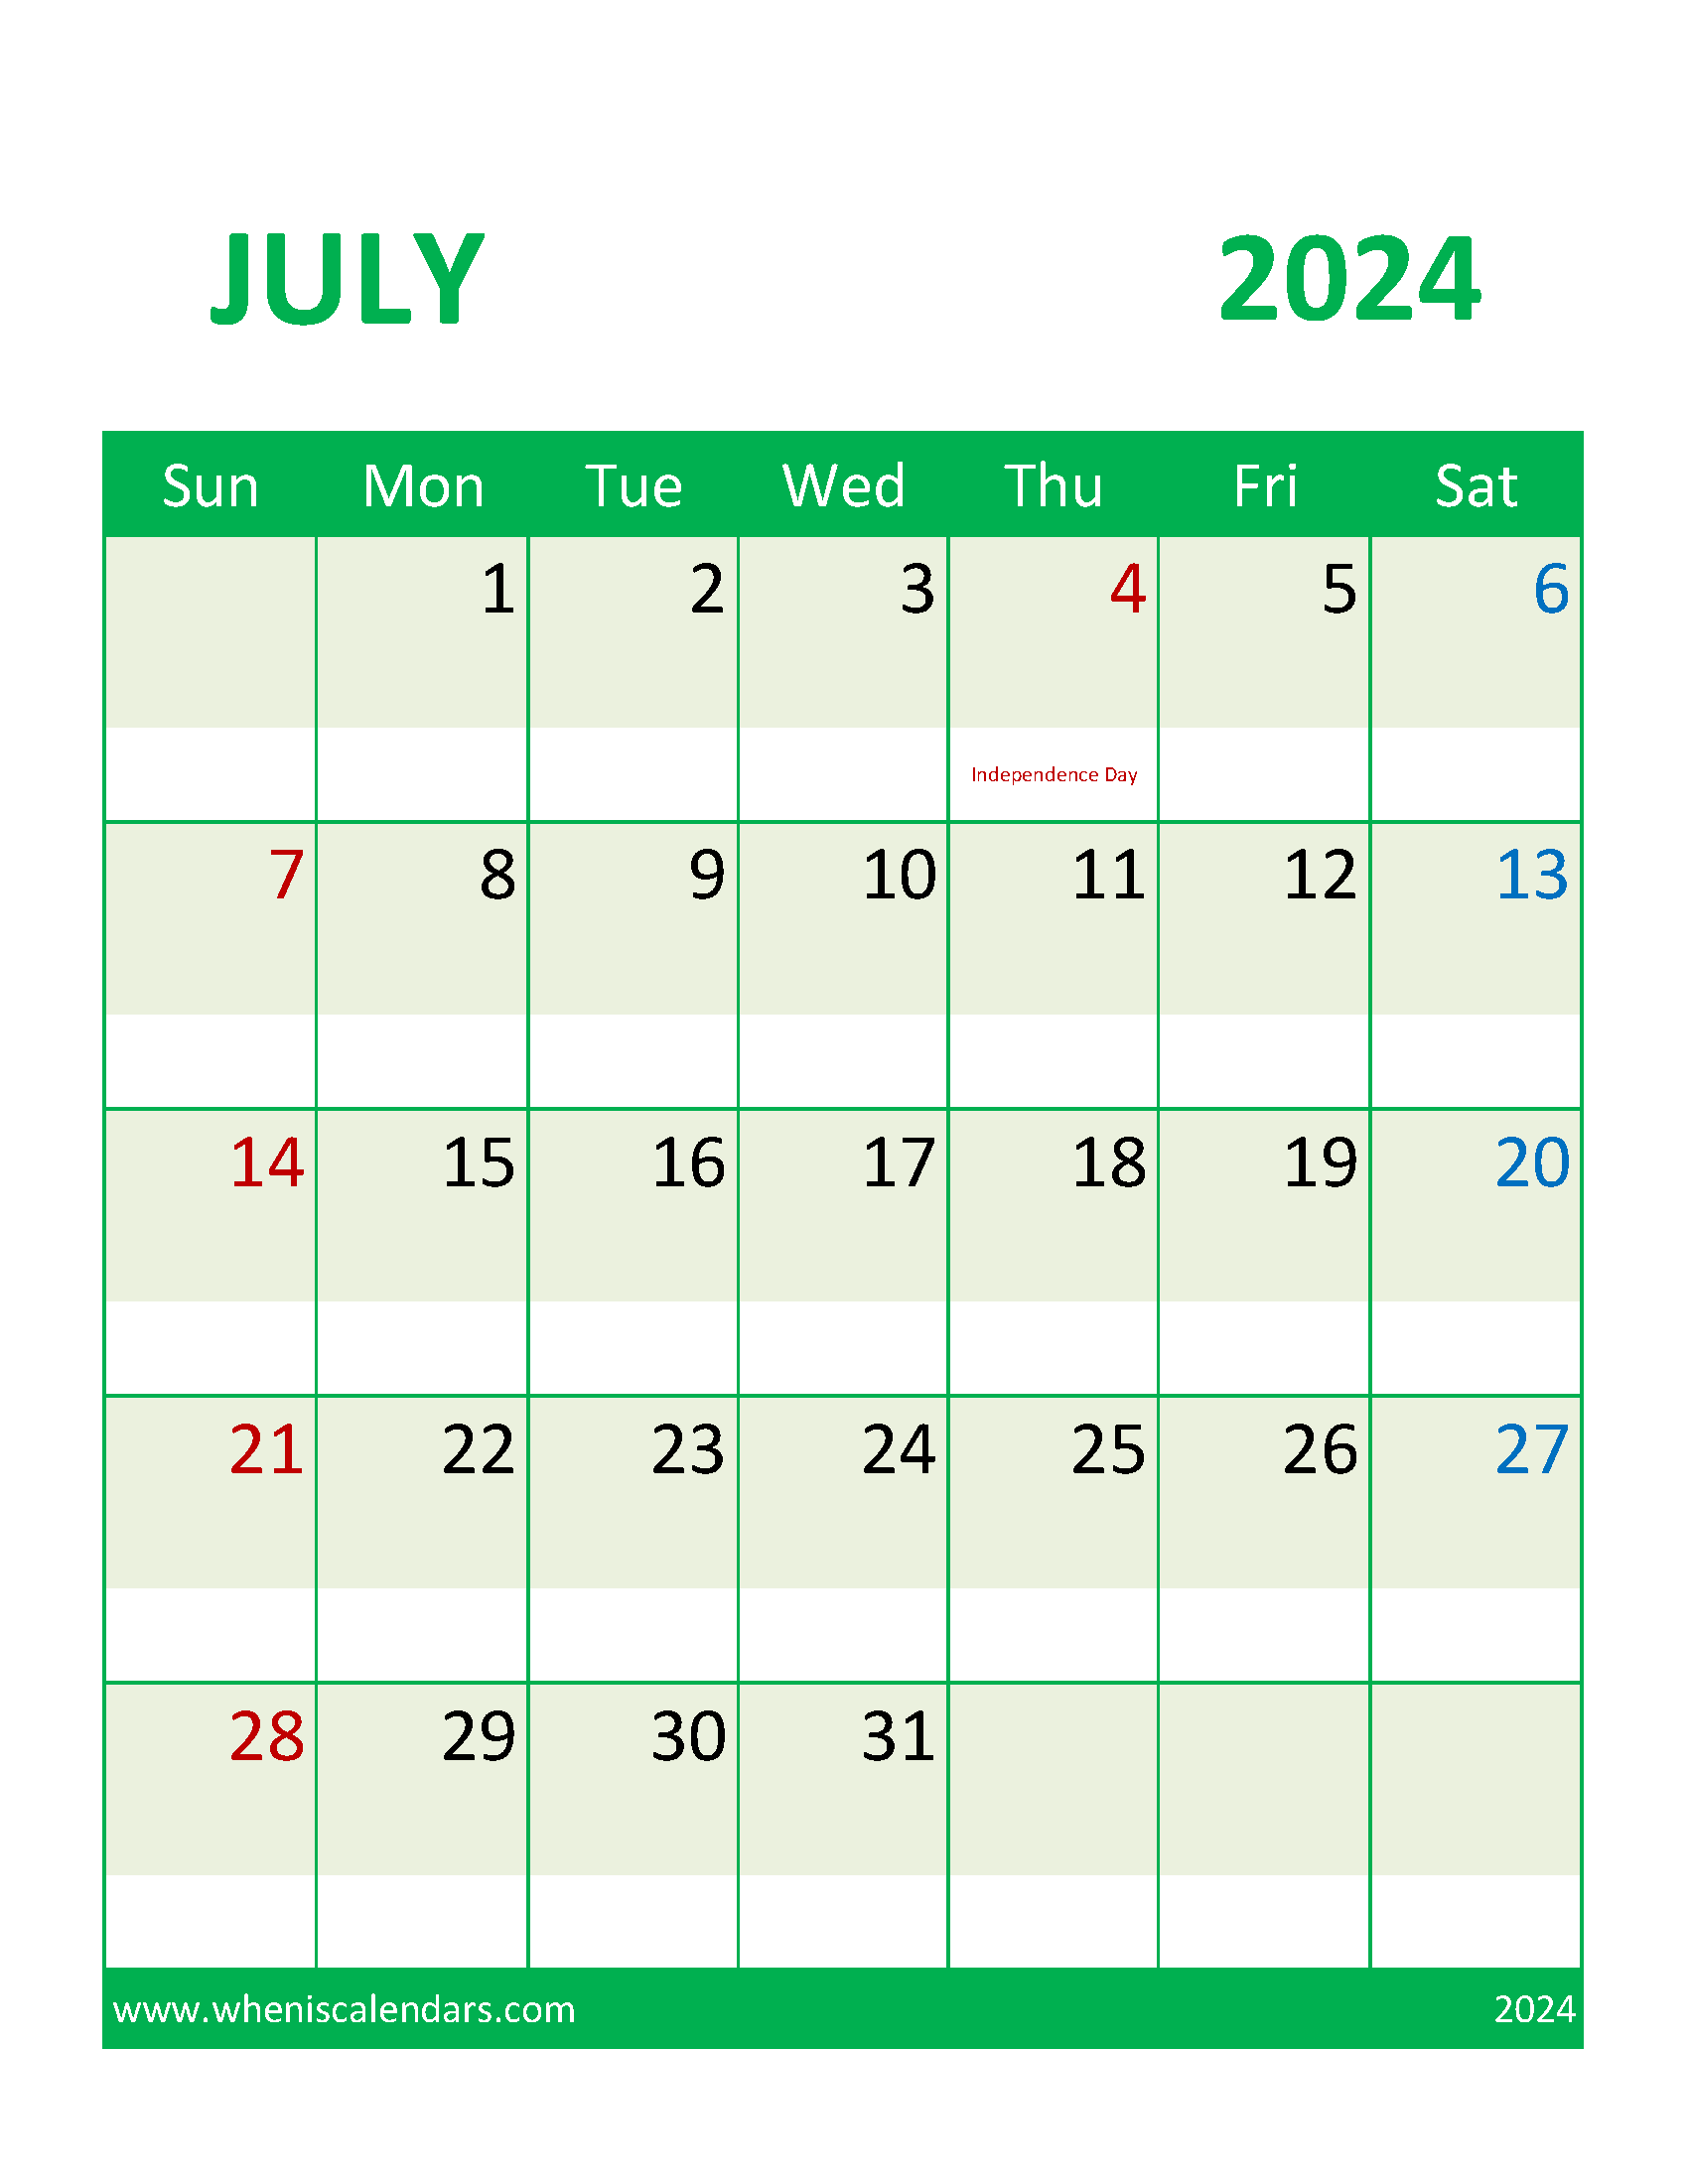 July 2024 Calendar Printable Free with Holidays Monthly Calendar